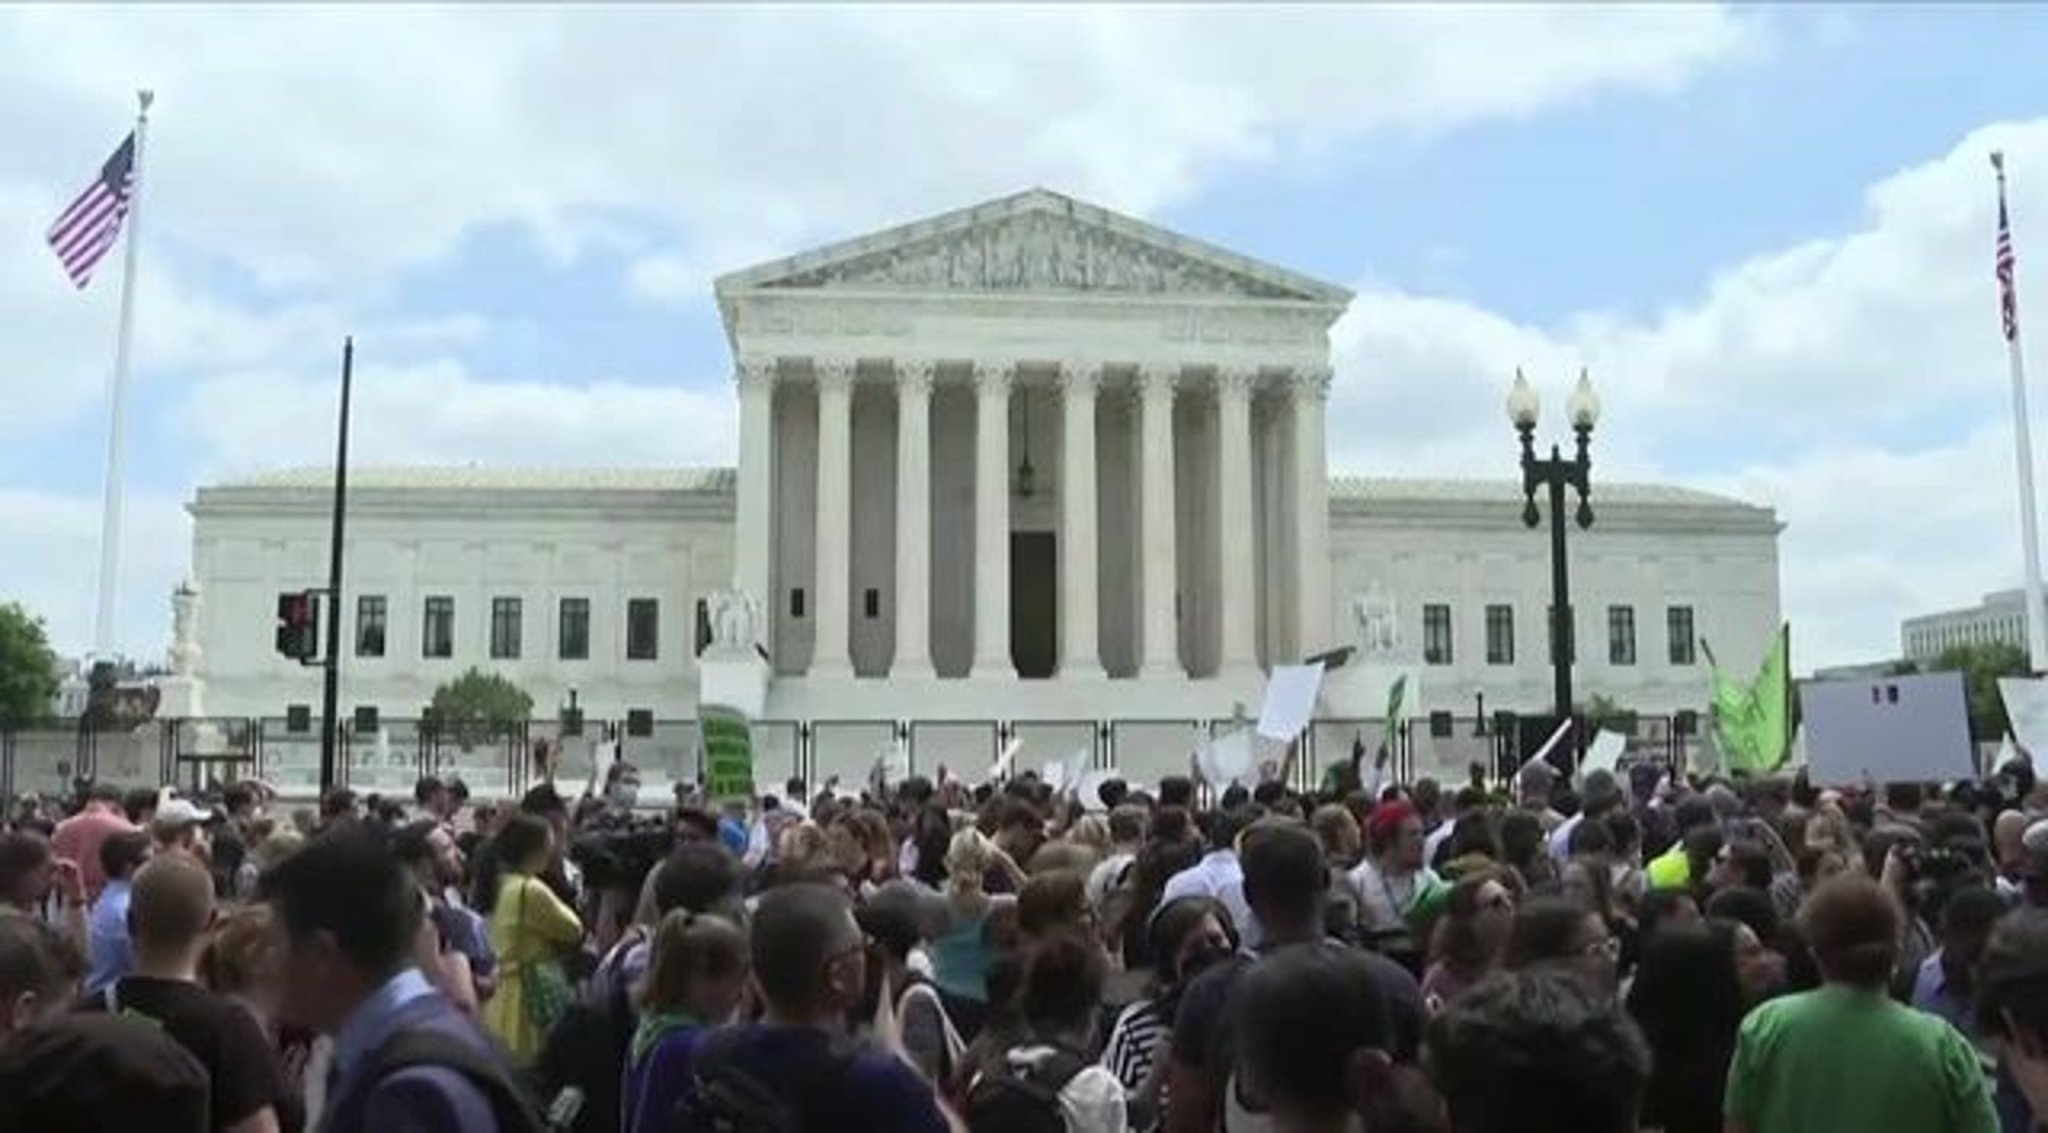 "My body, my choice" chants outside of the Supreme Court.